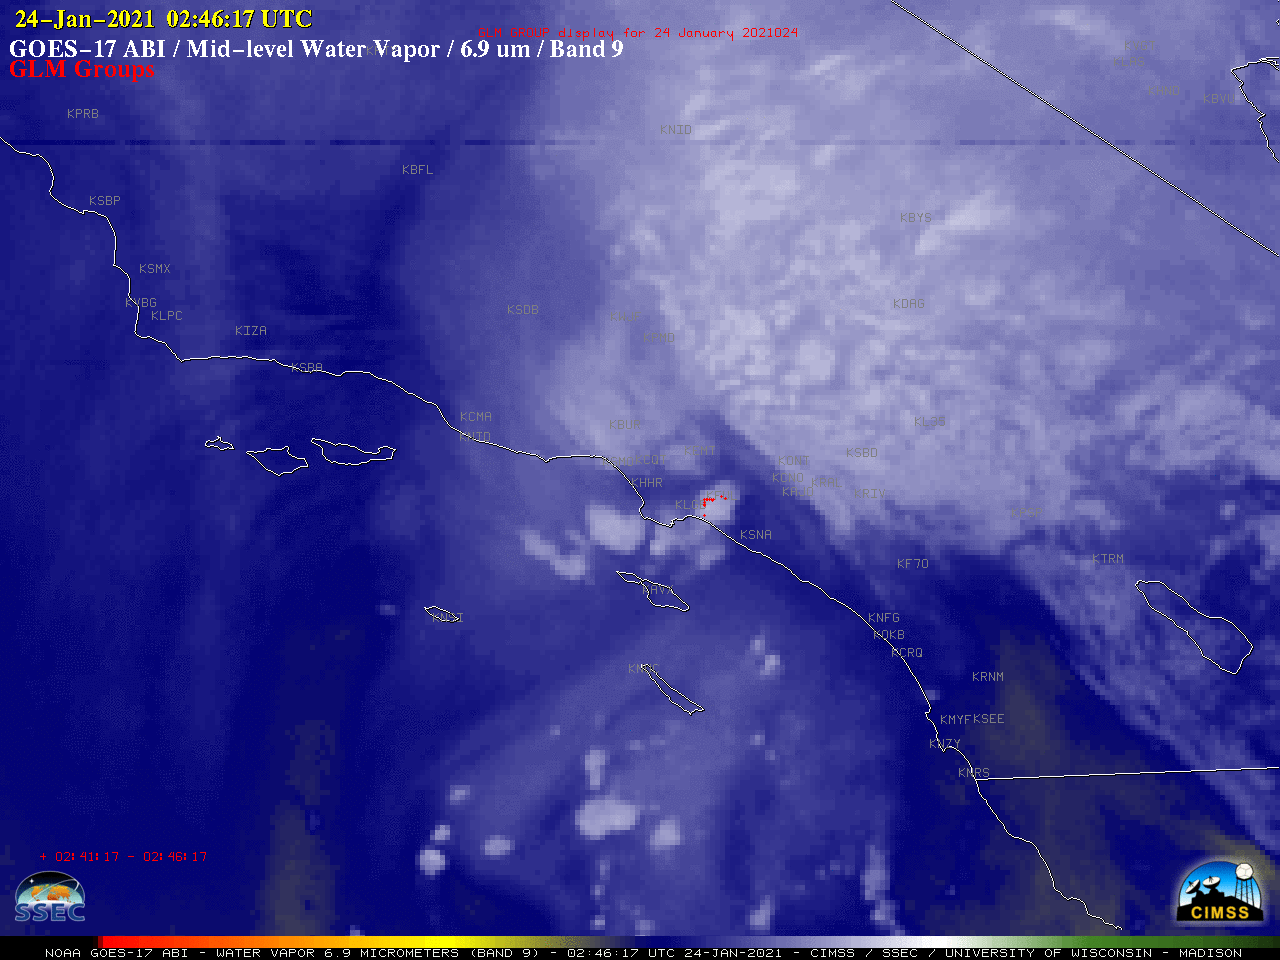 GOES-17 Mid-level Water Vapor (6.9 µm) image at 0246 UTC, with GLM Groups plotted in red [click to enlarge]